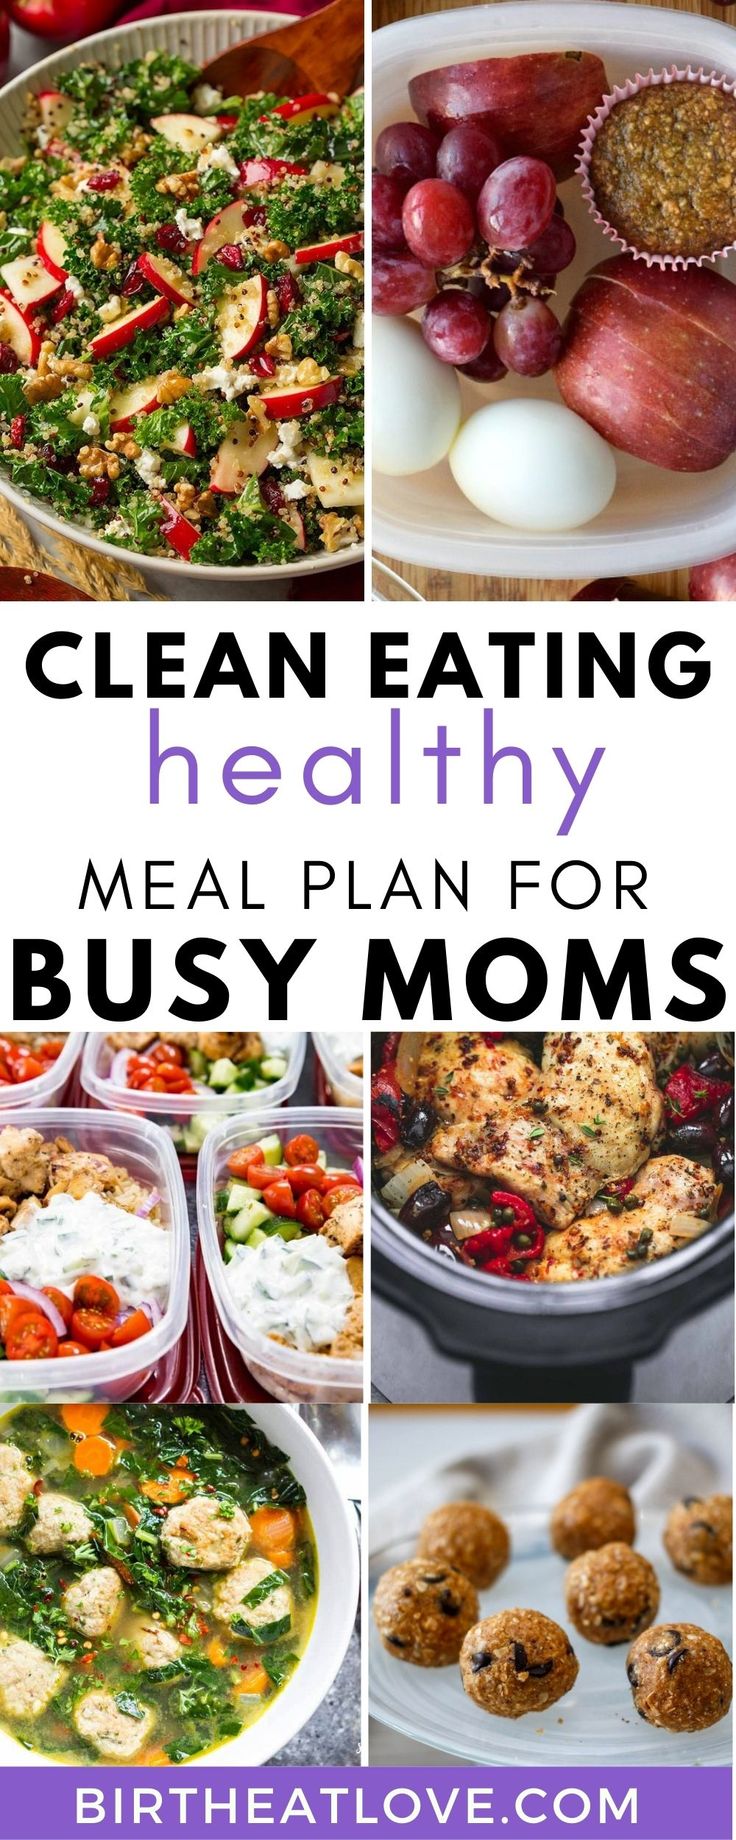 the meal plan for busy moms is full of healthy meals, including meat and vegetables